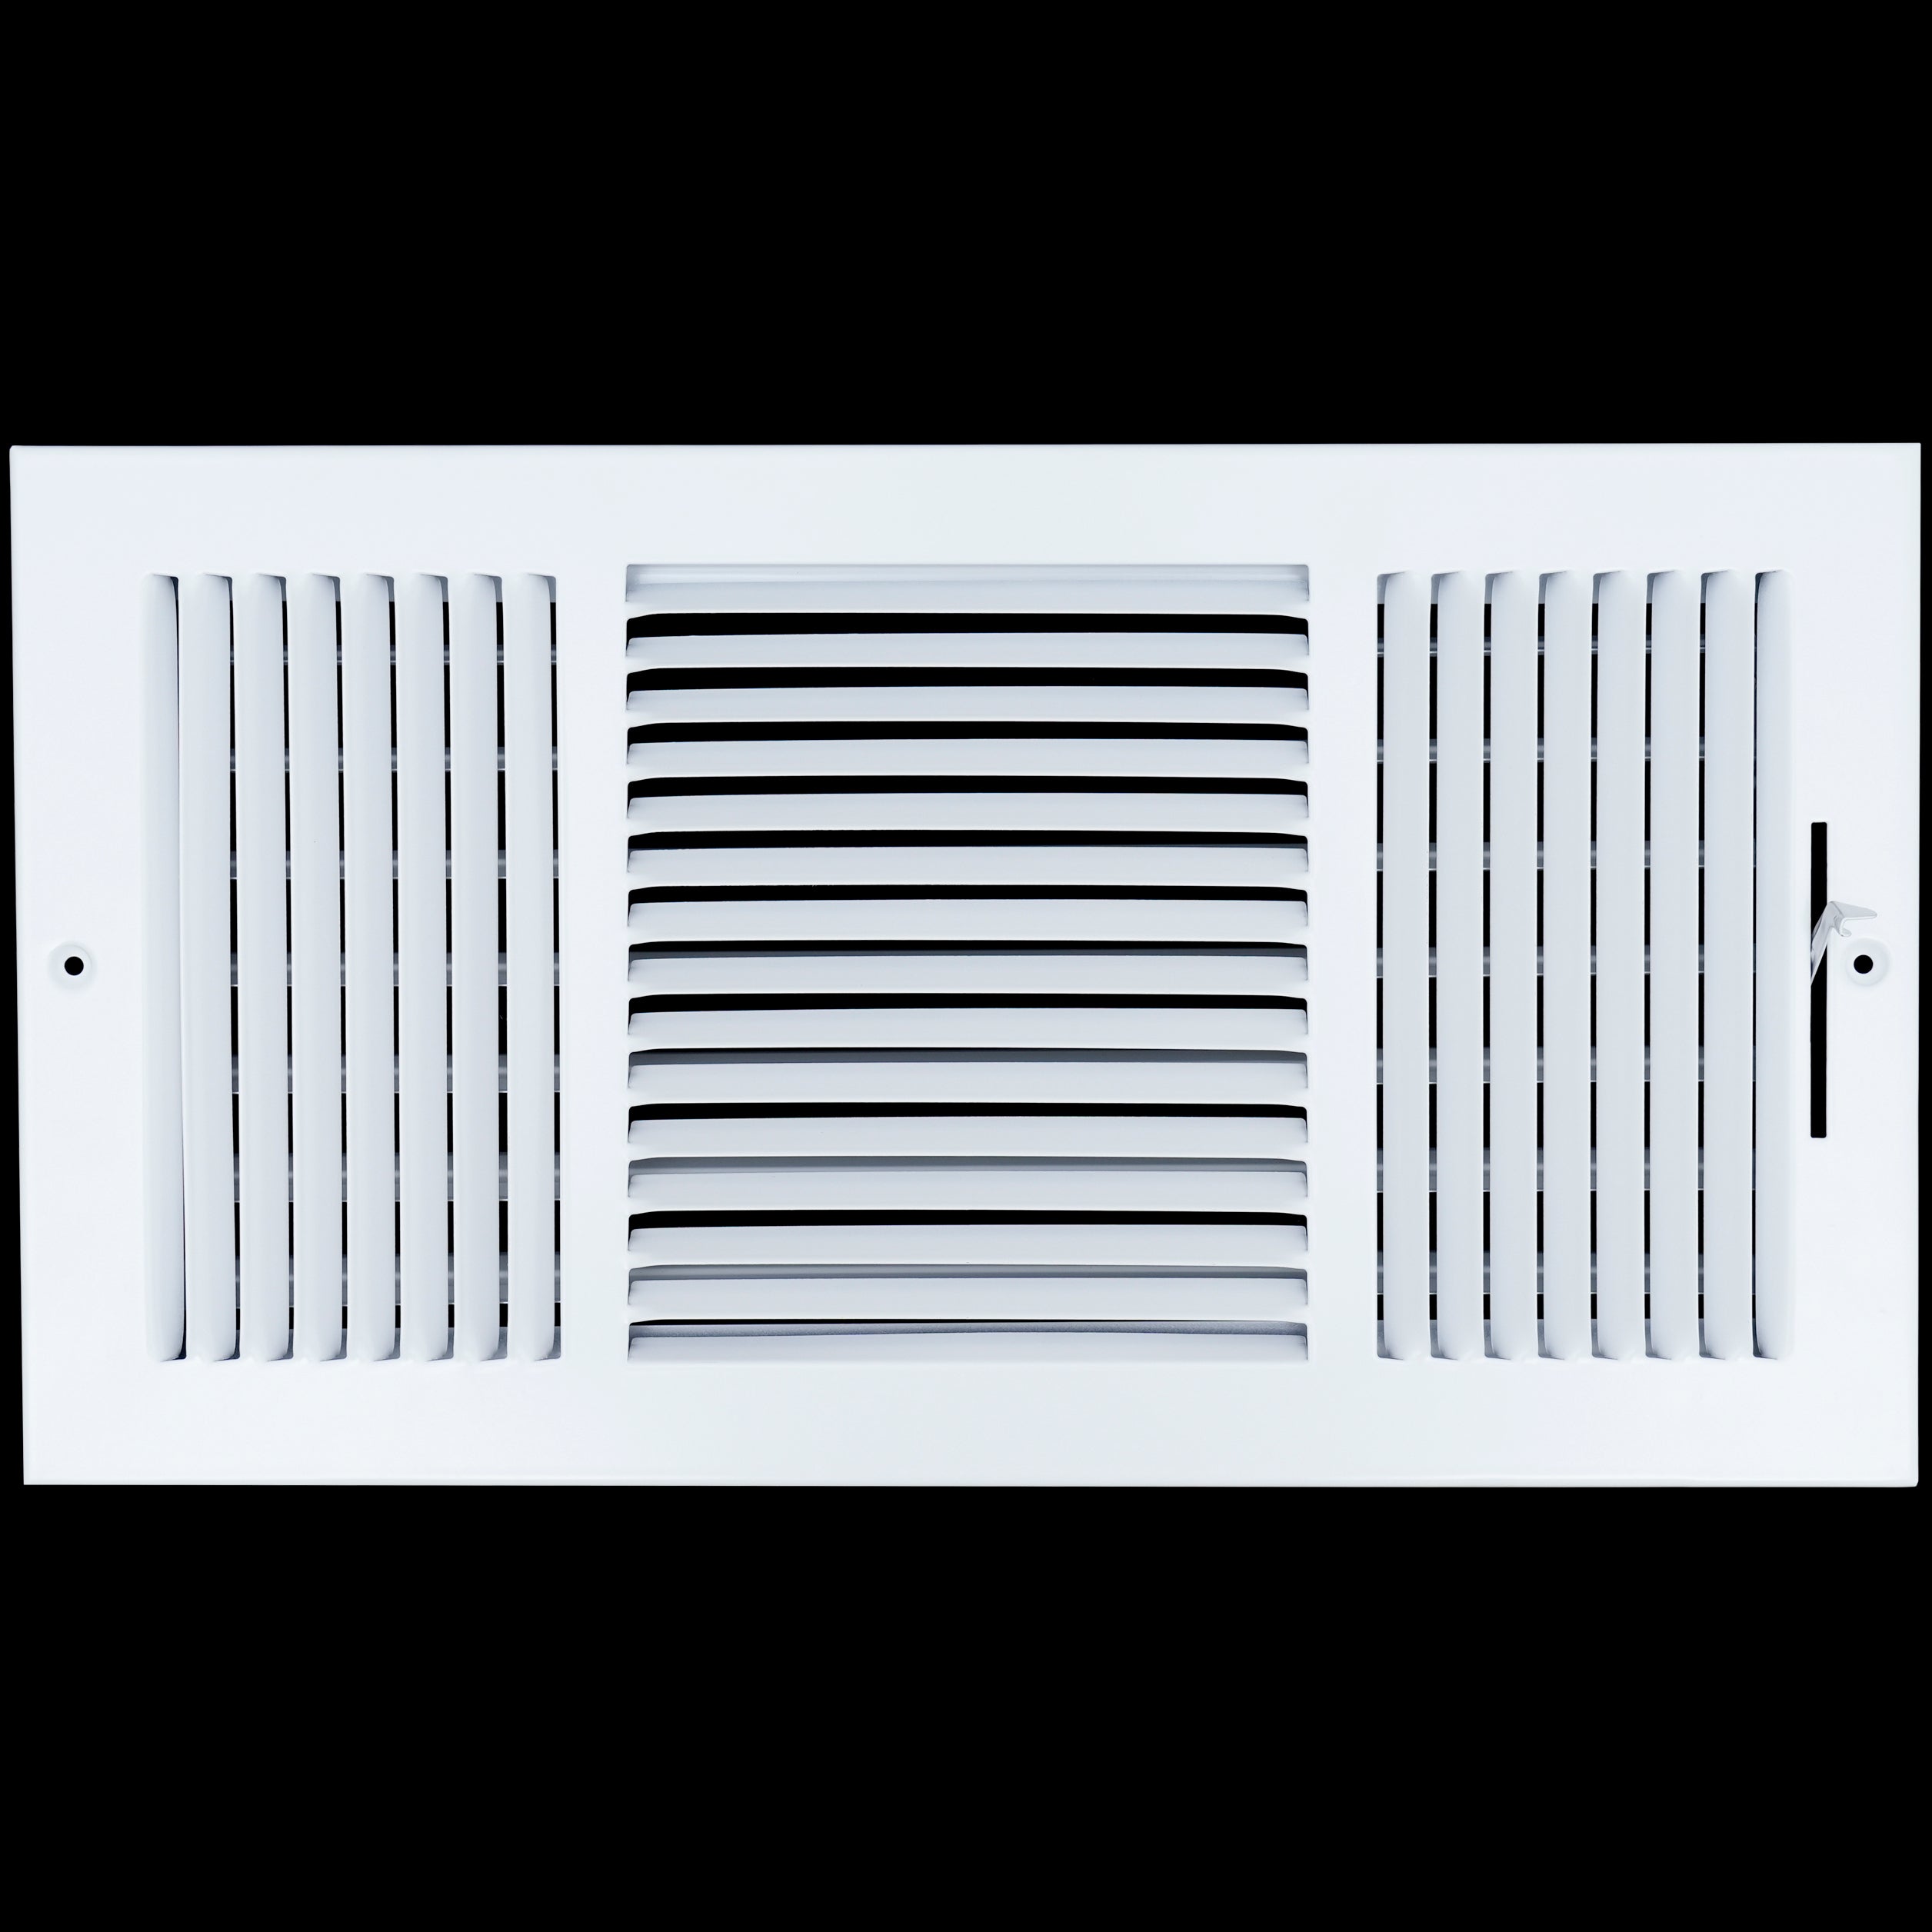 airgrilles 16 x 8 duct opening  -  3 way steel air supply diffuser for sidewall and ceiling hnd-asg-wh-3way-16x8 764613097573 - 1